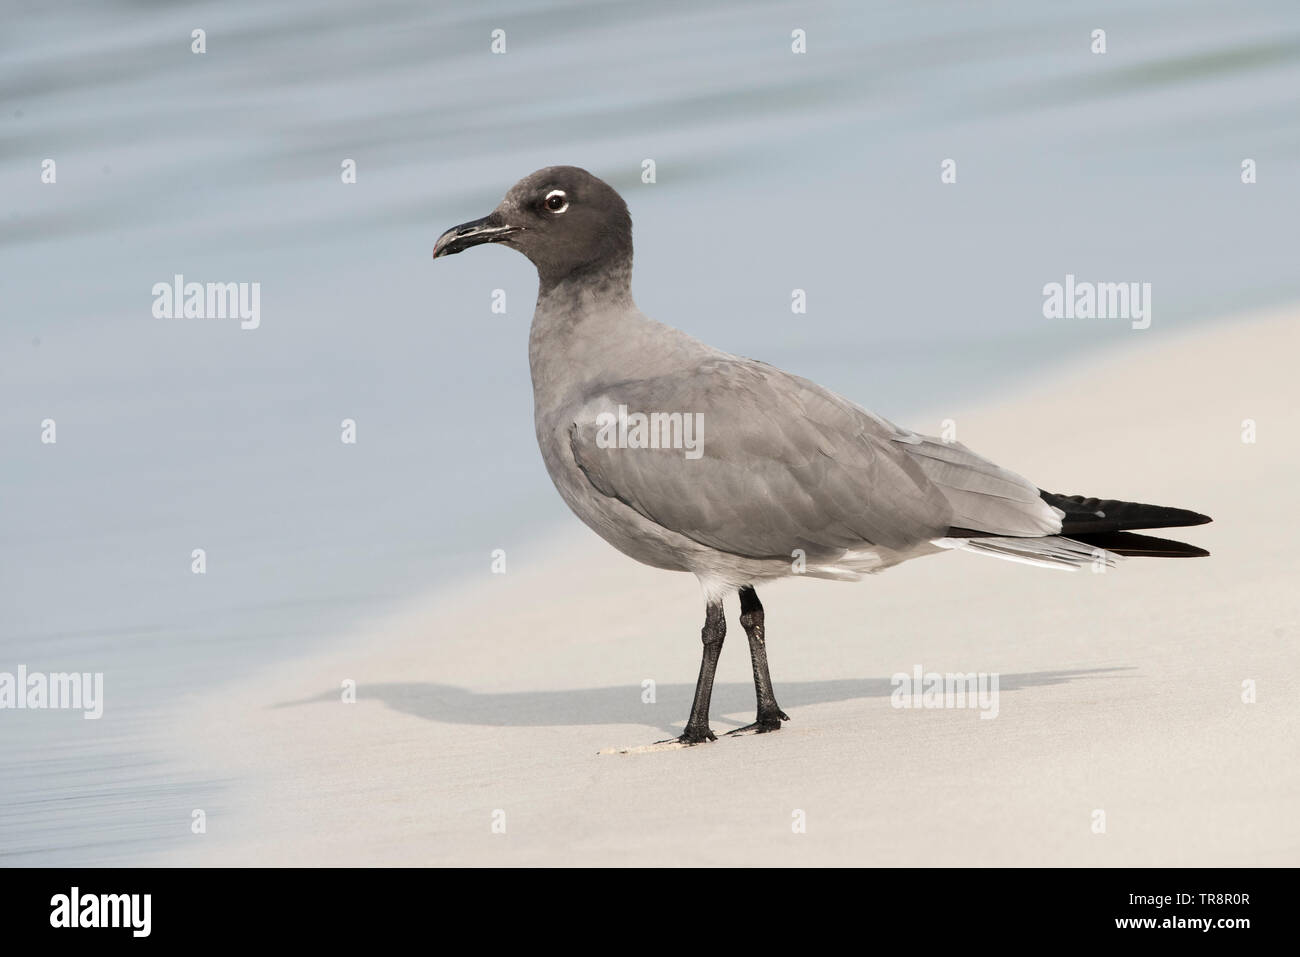 A lava gull (Leucophaeus fuliginosus) from Isabela island in the Galapagos. Endemic to the islands, its is considered the rarest gull species. Stock Photo